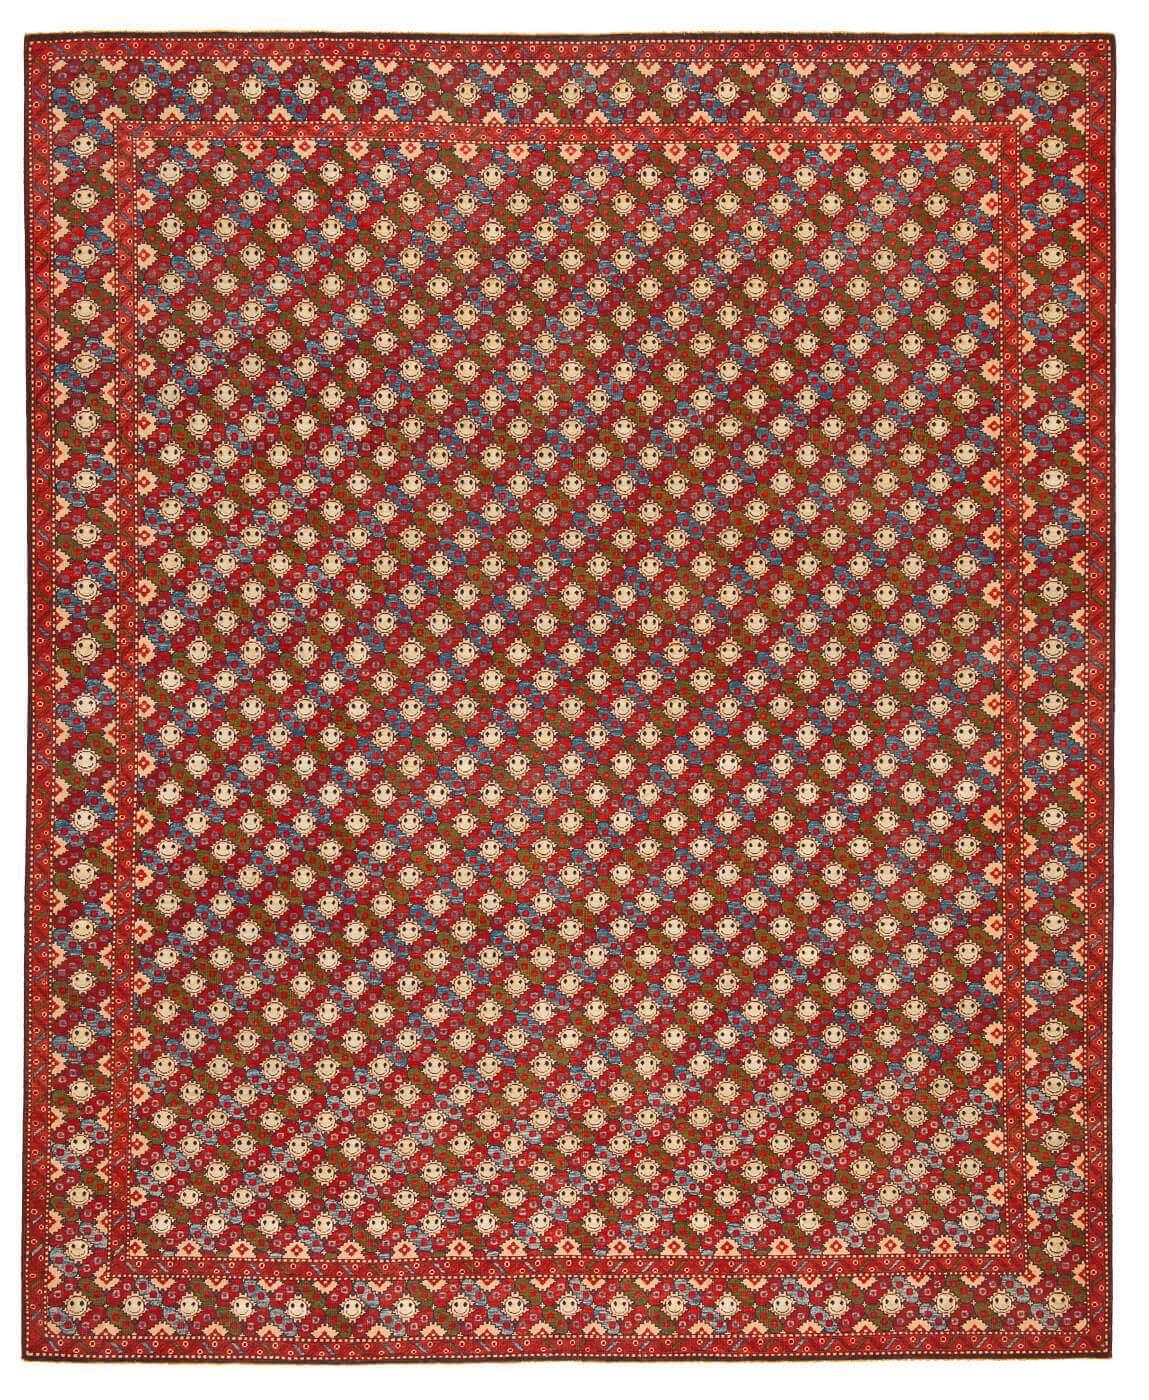 Red Hand-woven Checkered Luxury Rug